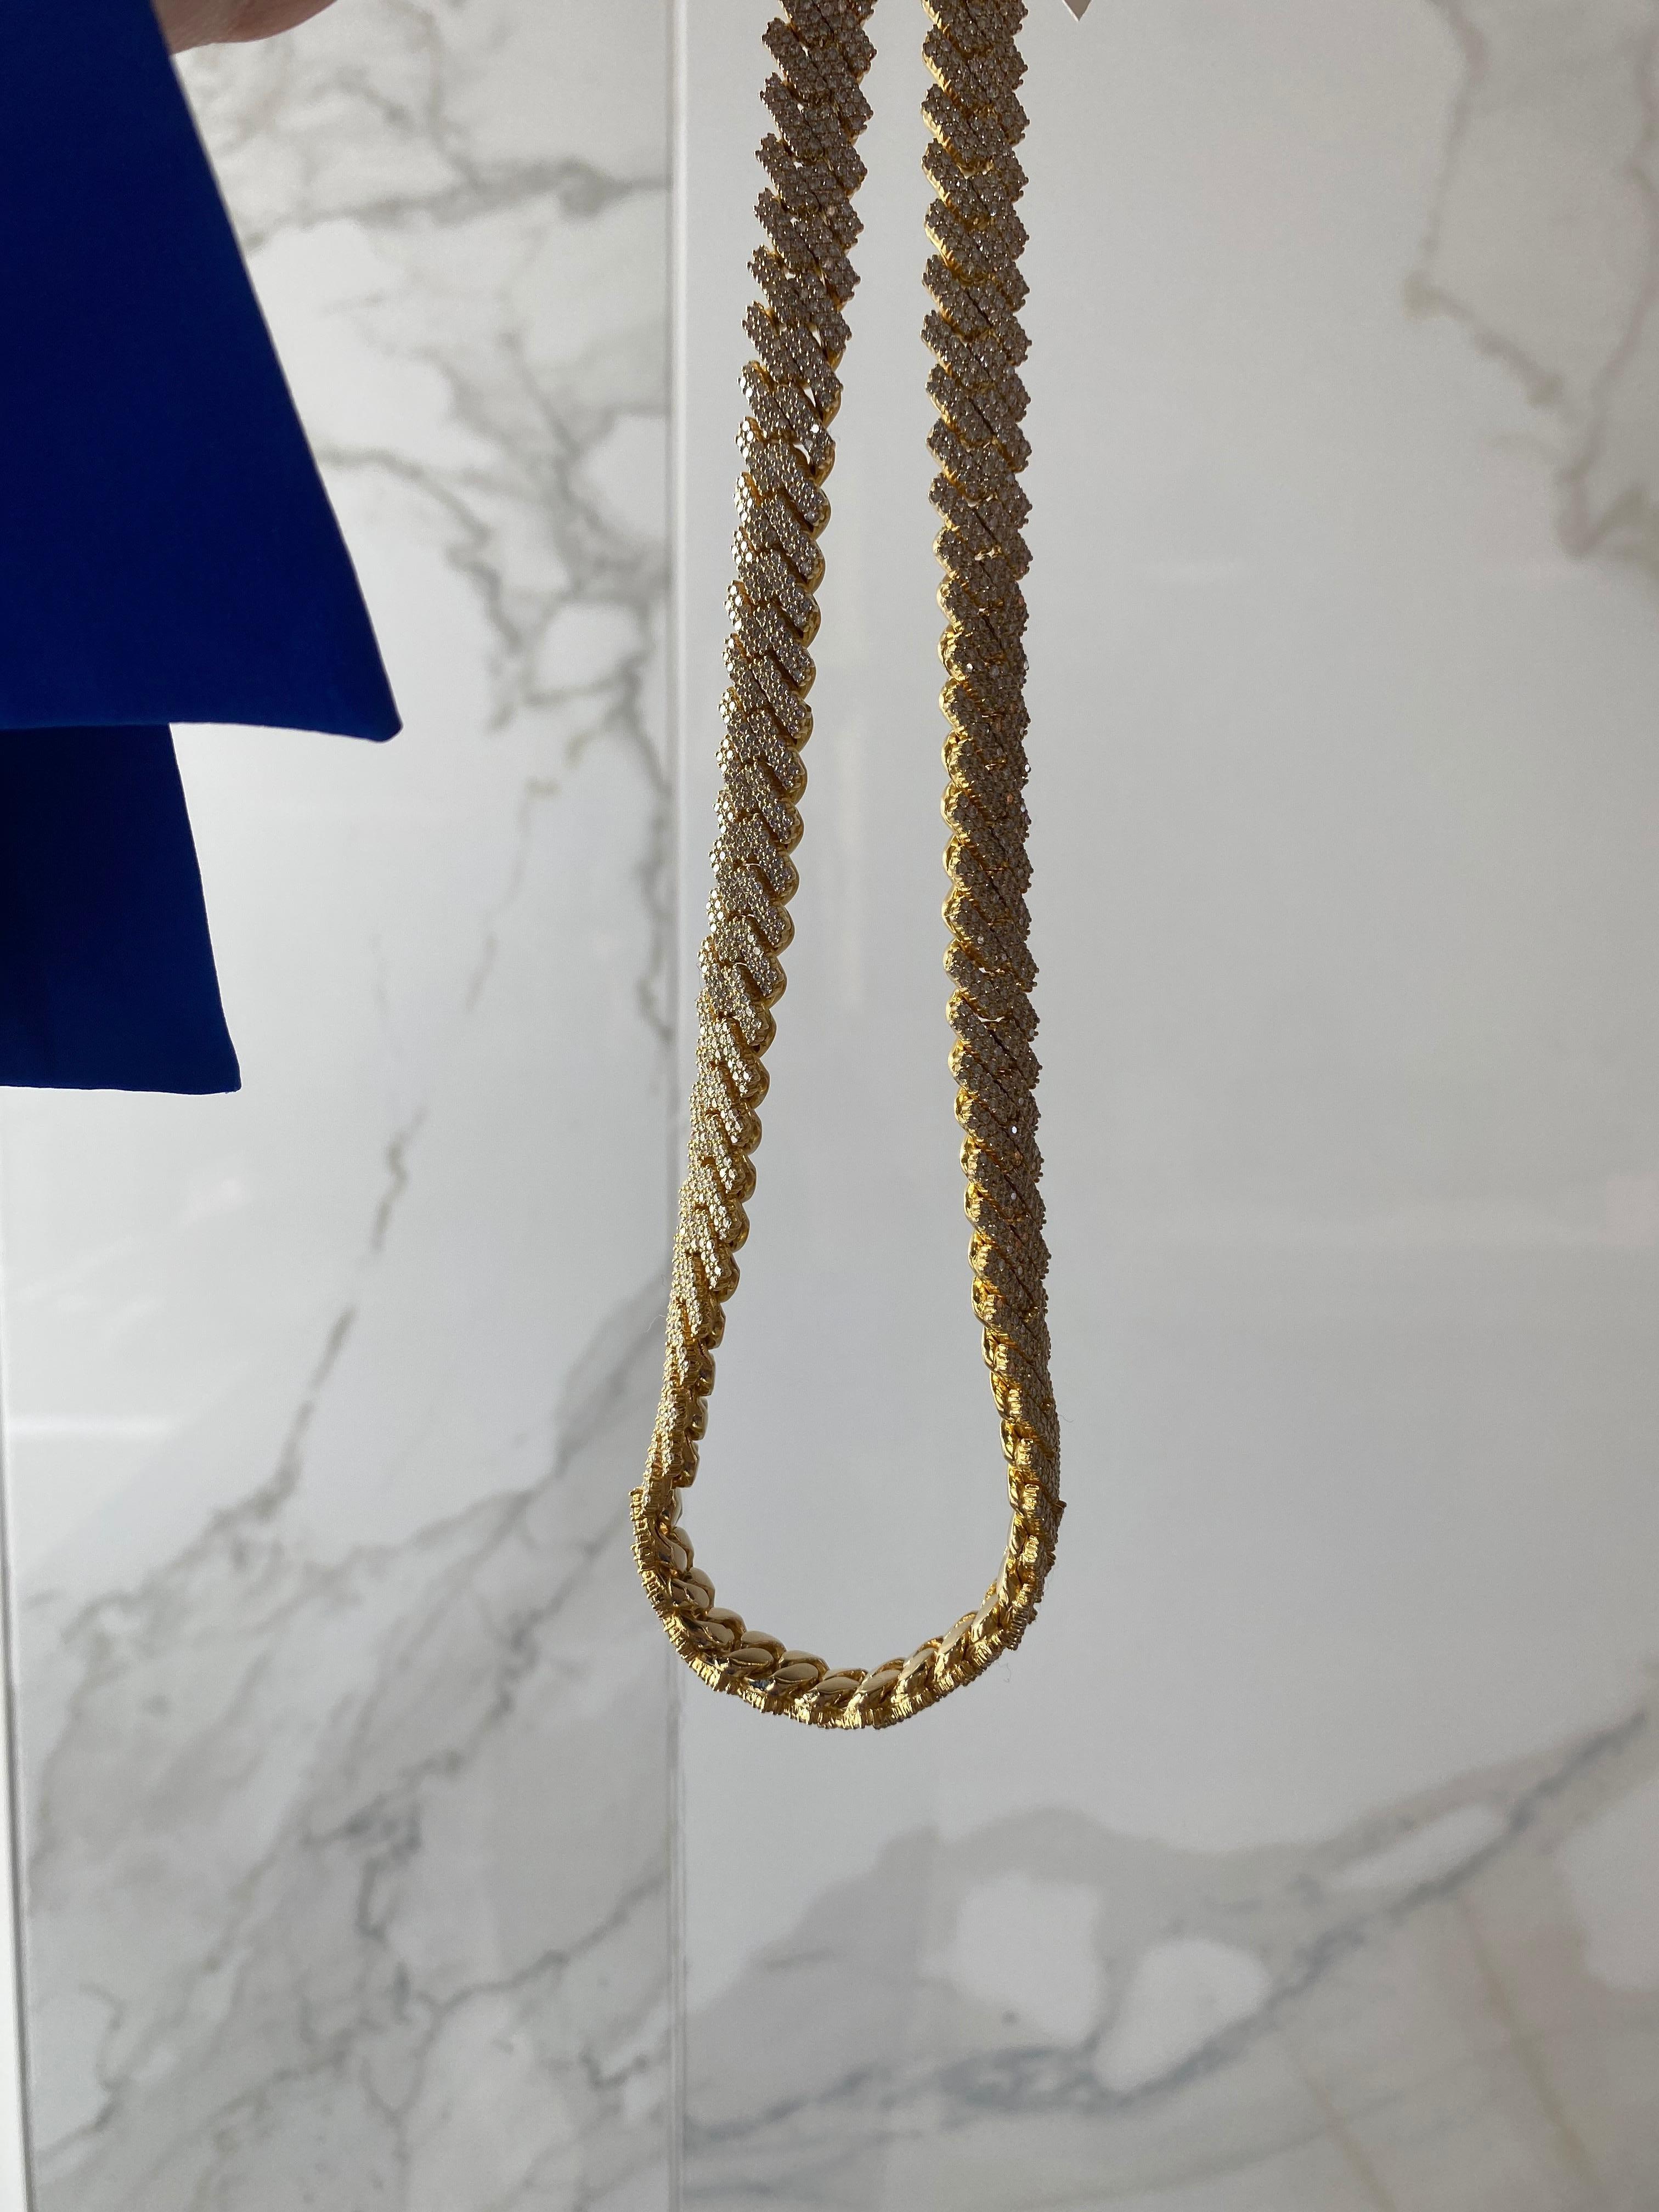 22ctw Round Brilliant Diamond 14kt Yellow Gold Cuban Link Chain In Excellent Condition For Sale In Houston, TX